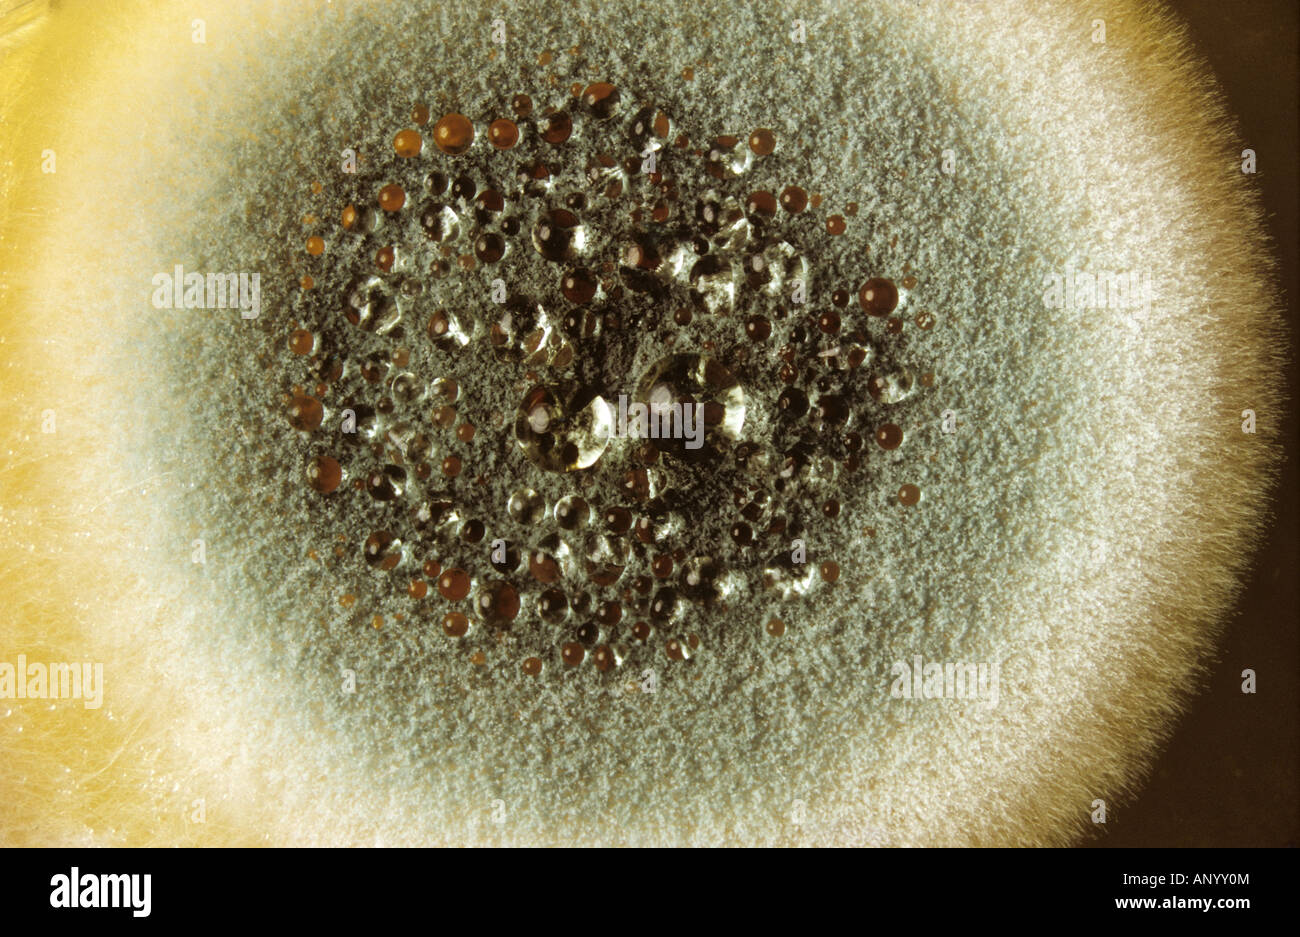 Penicillium sp culture with exuded water droplets on a nutrient agar plate Stock Photo